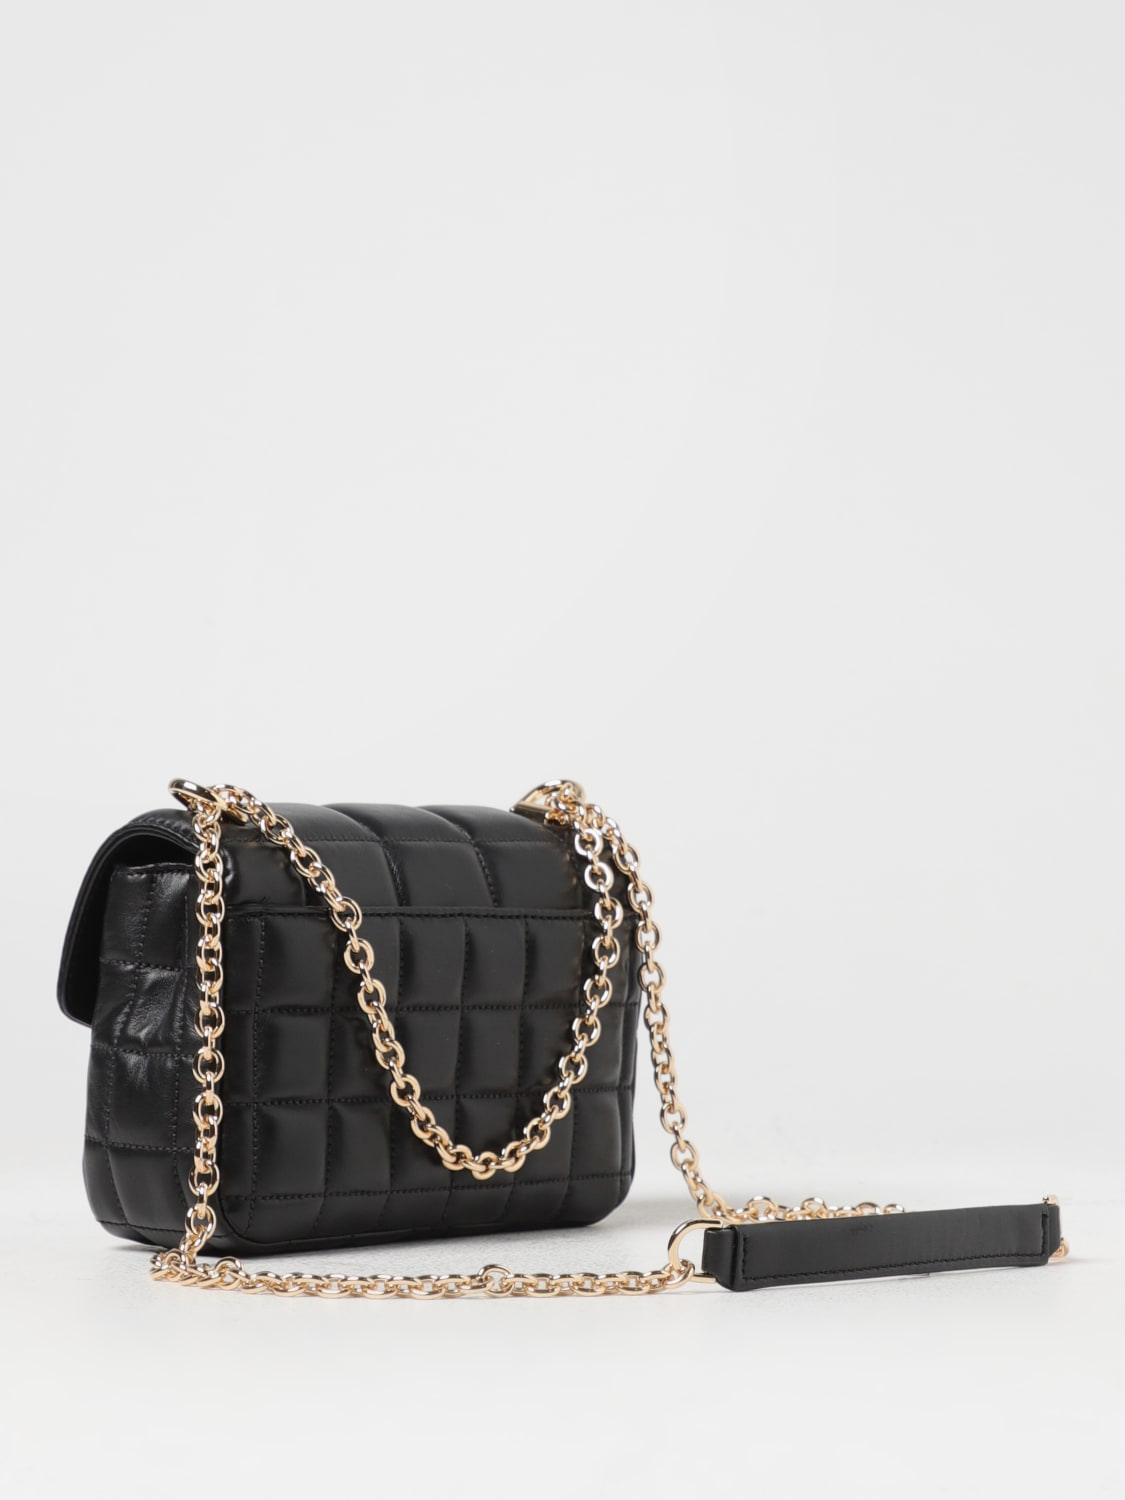 Michael Kors - Black Quilted Leather Crossbody Bag w/ Gold Chain Strap